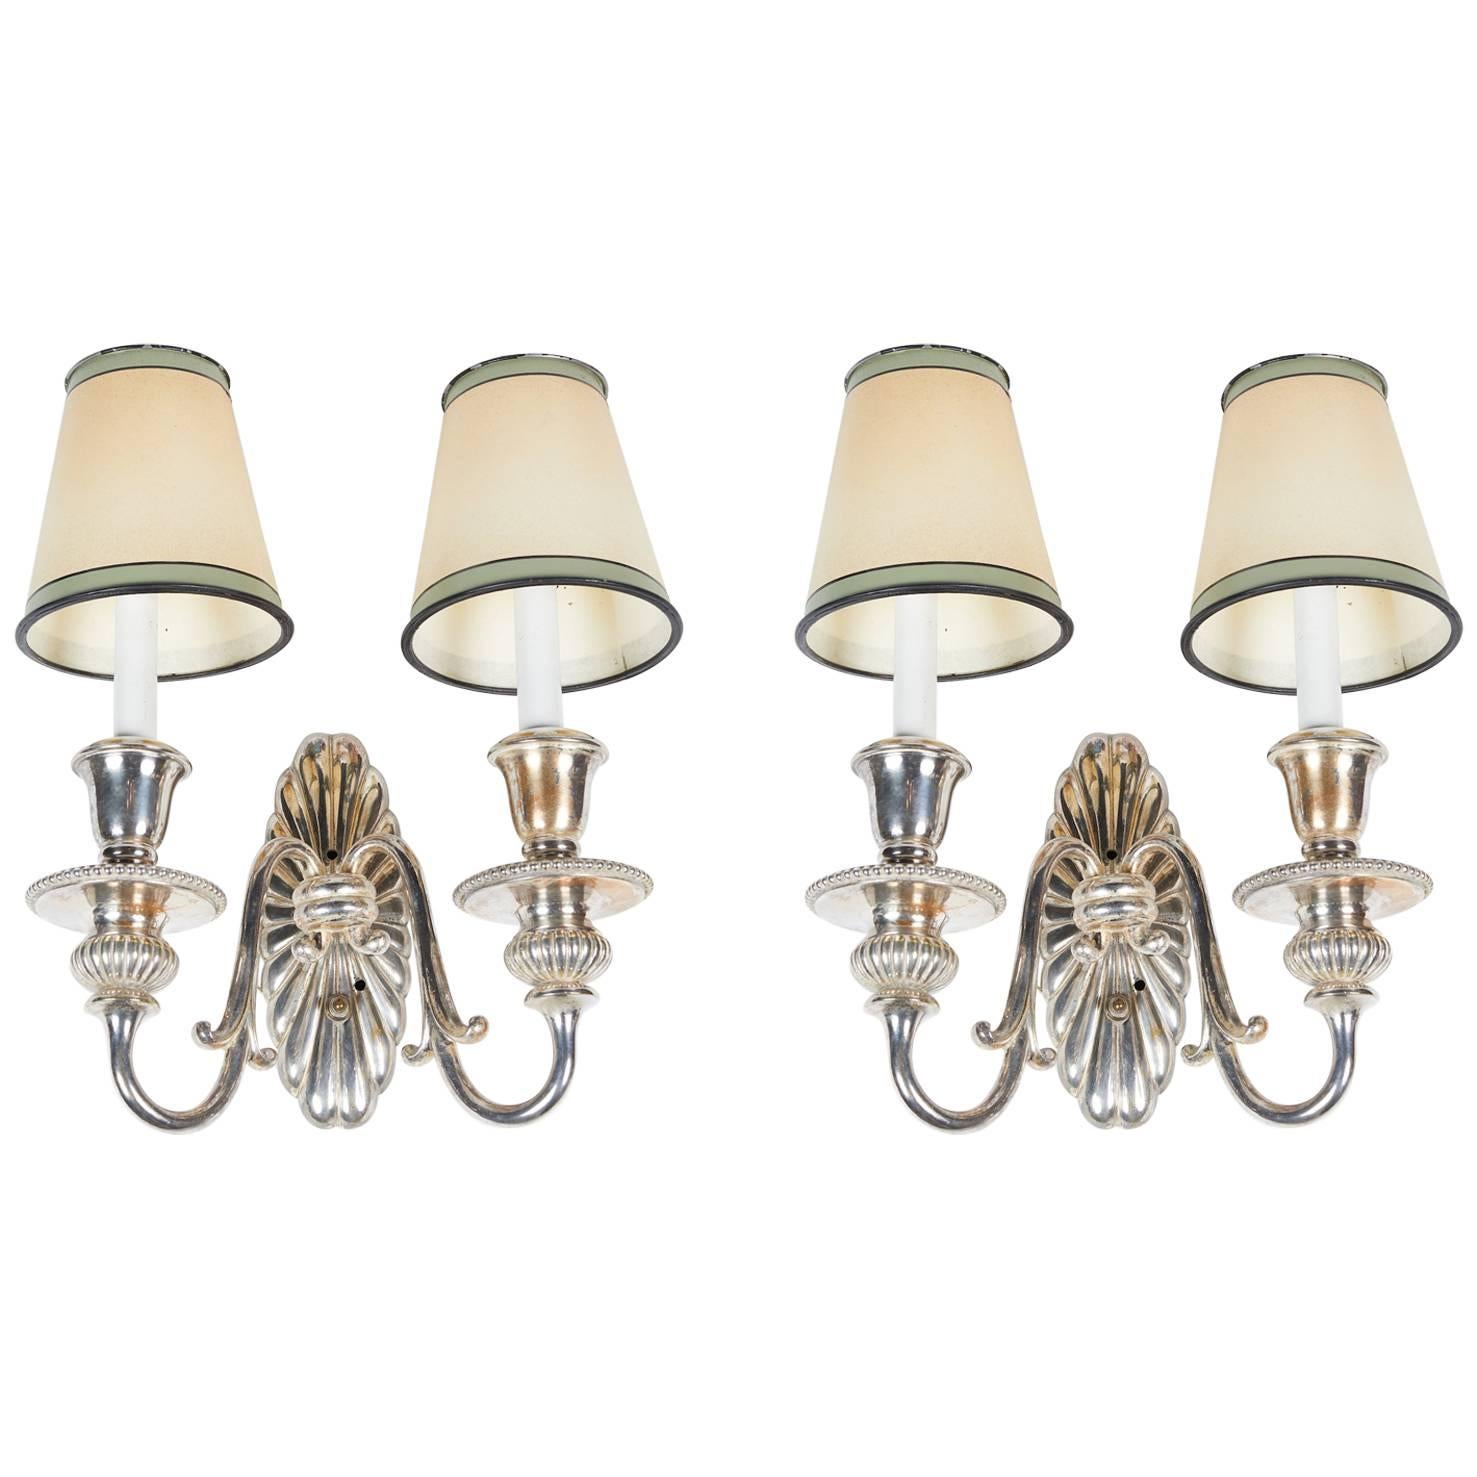 Elegant Pair of Silver Plated Adam Style Sconces